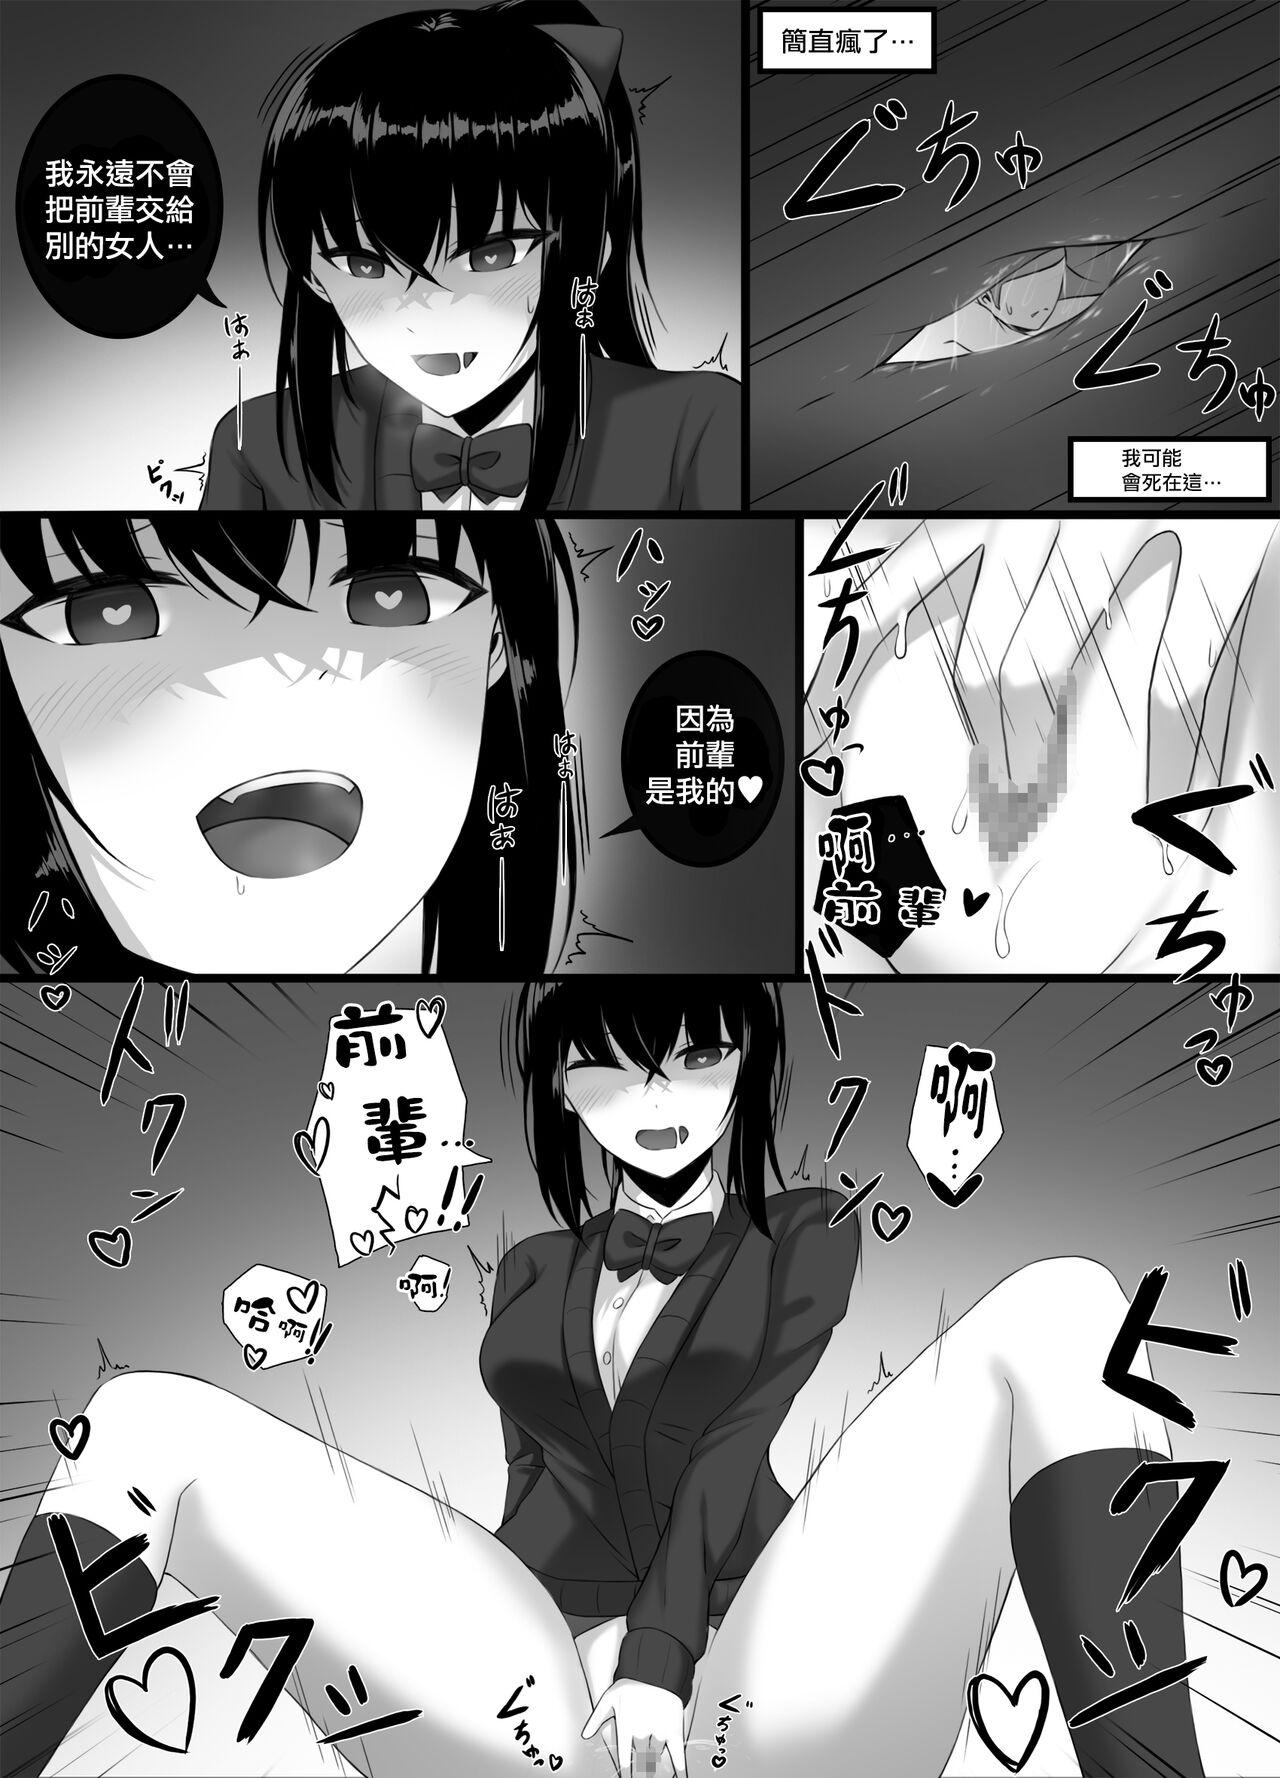 Mature Yandere girl Thailand - Page 10